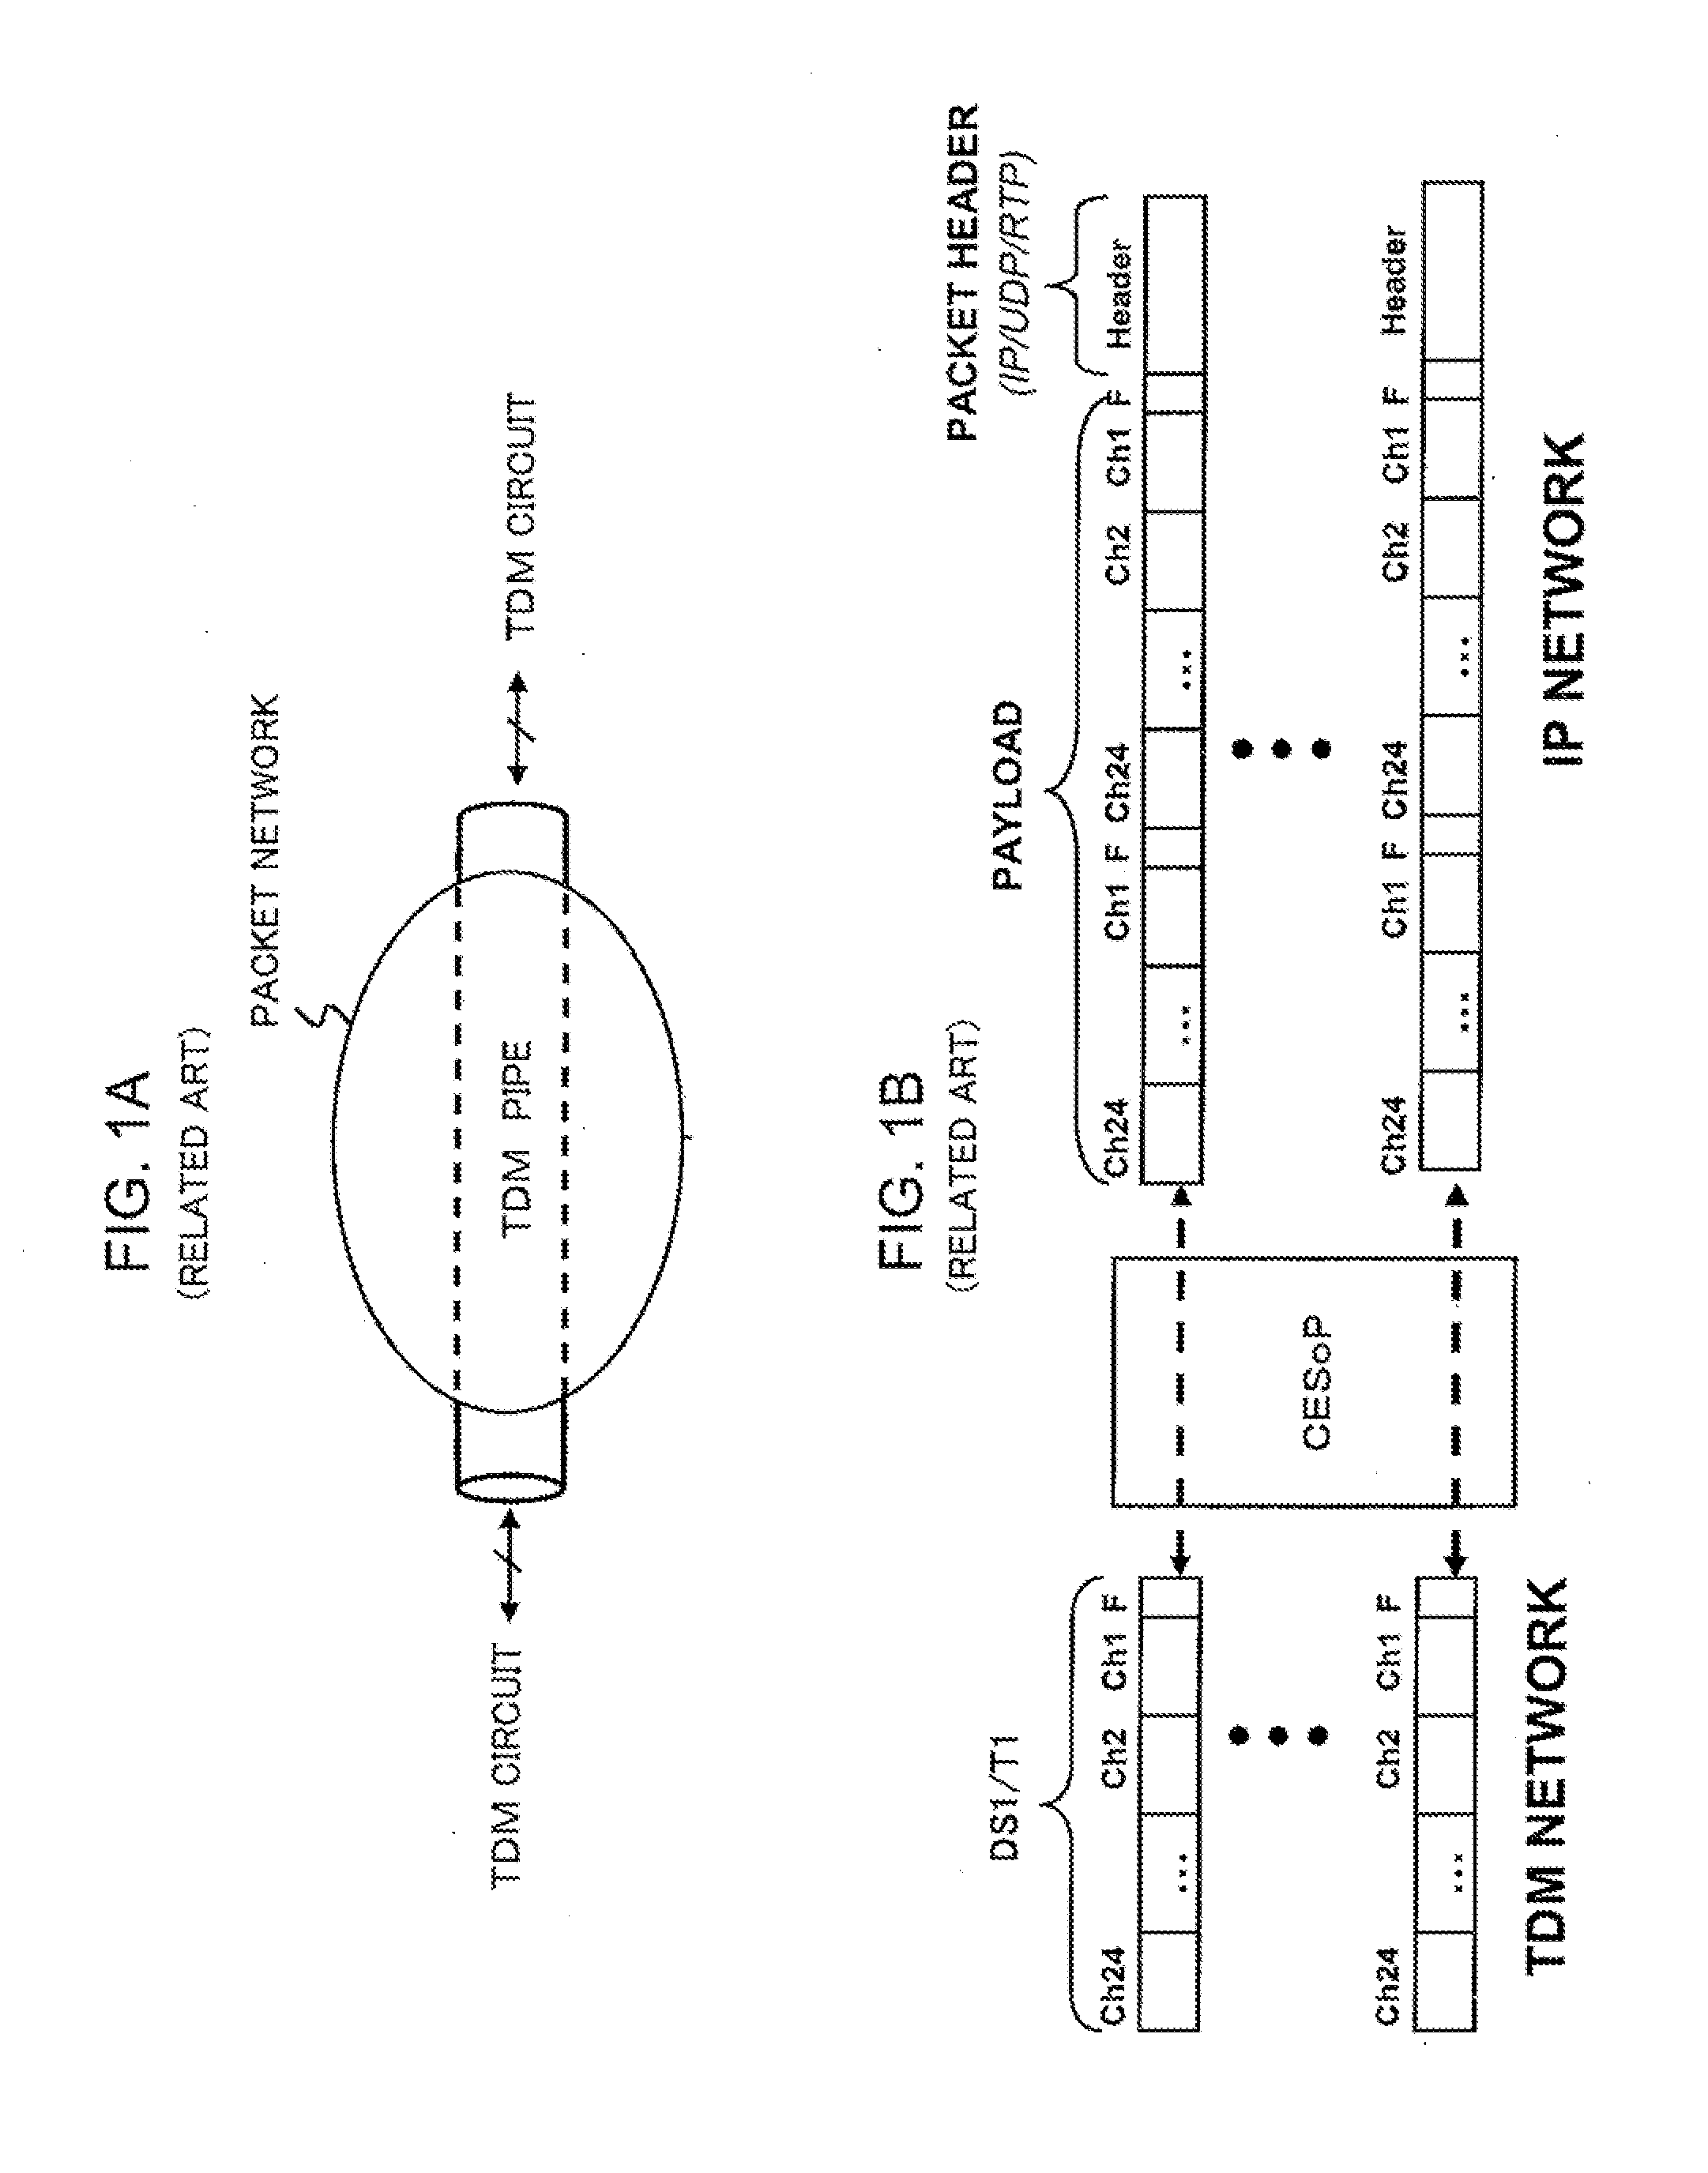 Device and method for transmission of tdm signal over asynchronous network